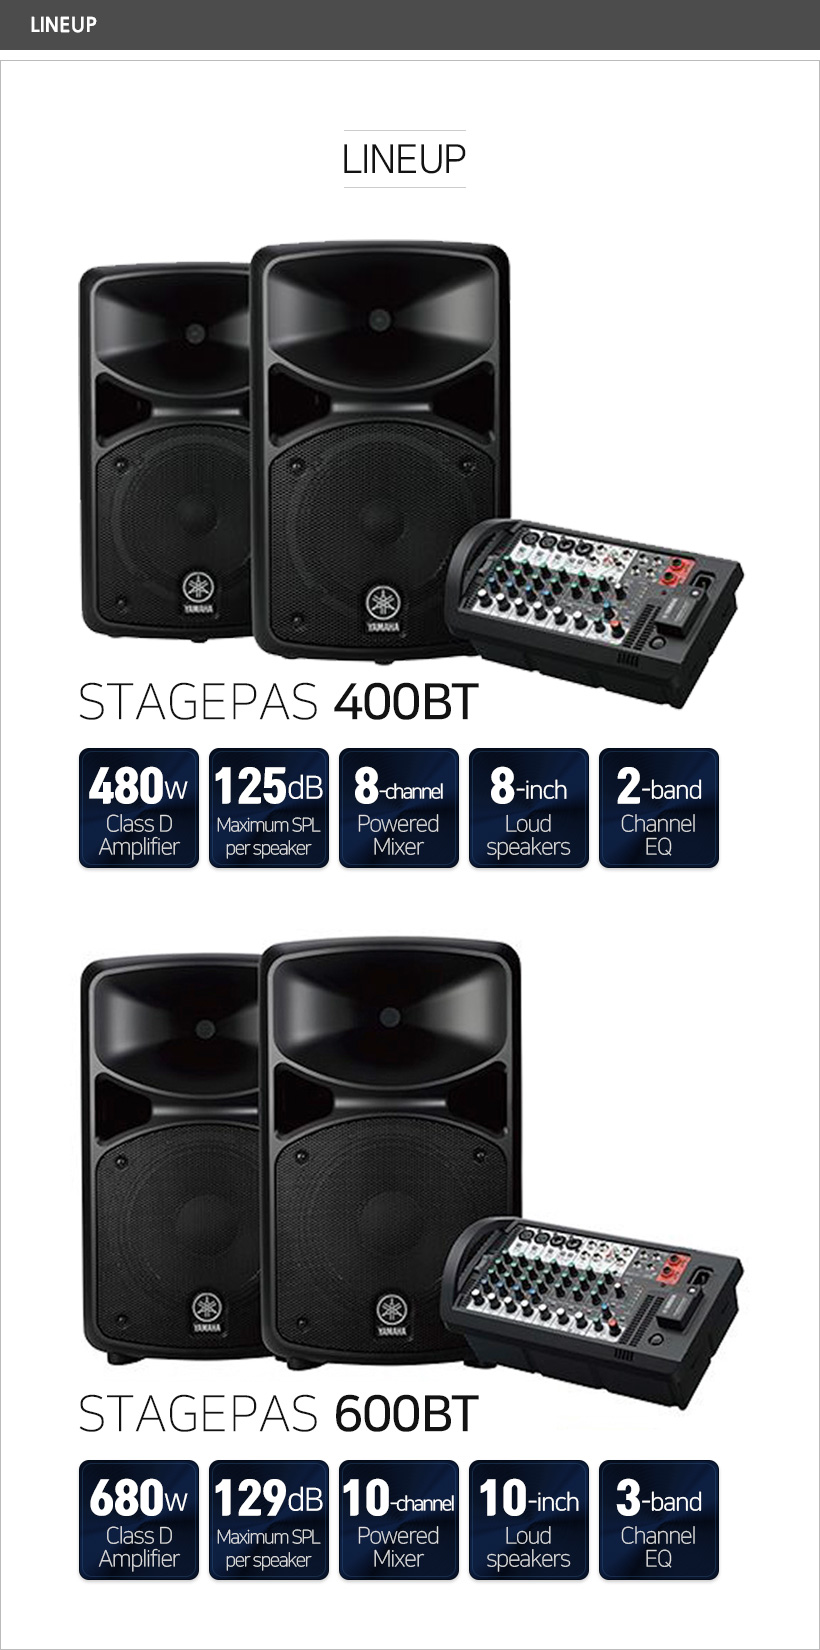 STAGEPAS 600BT LINEUP